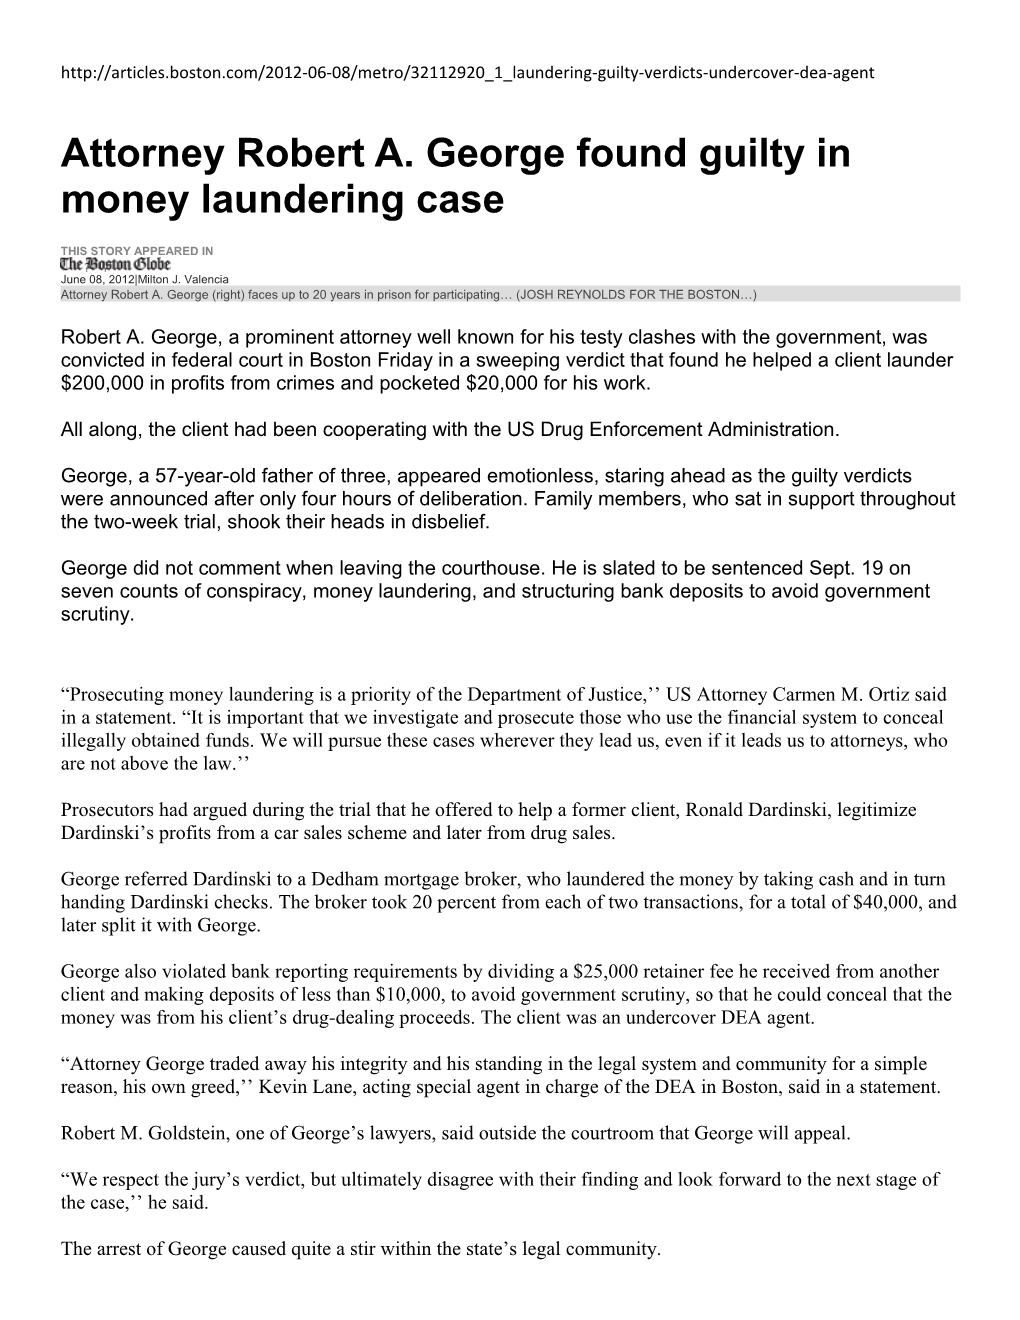 Attorney Robert A. George Found Guilty in Money Laundering Case